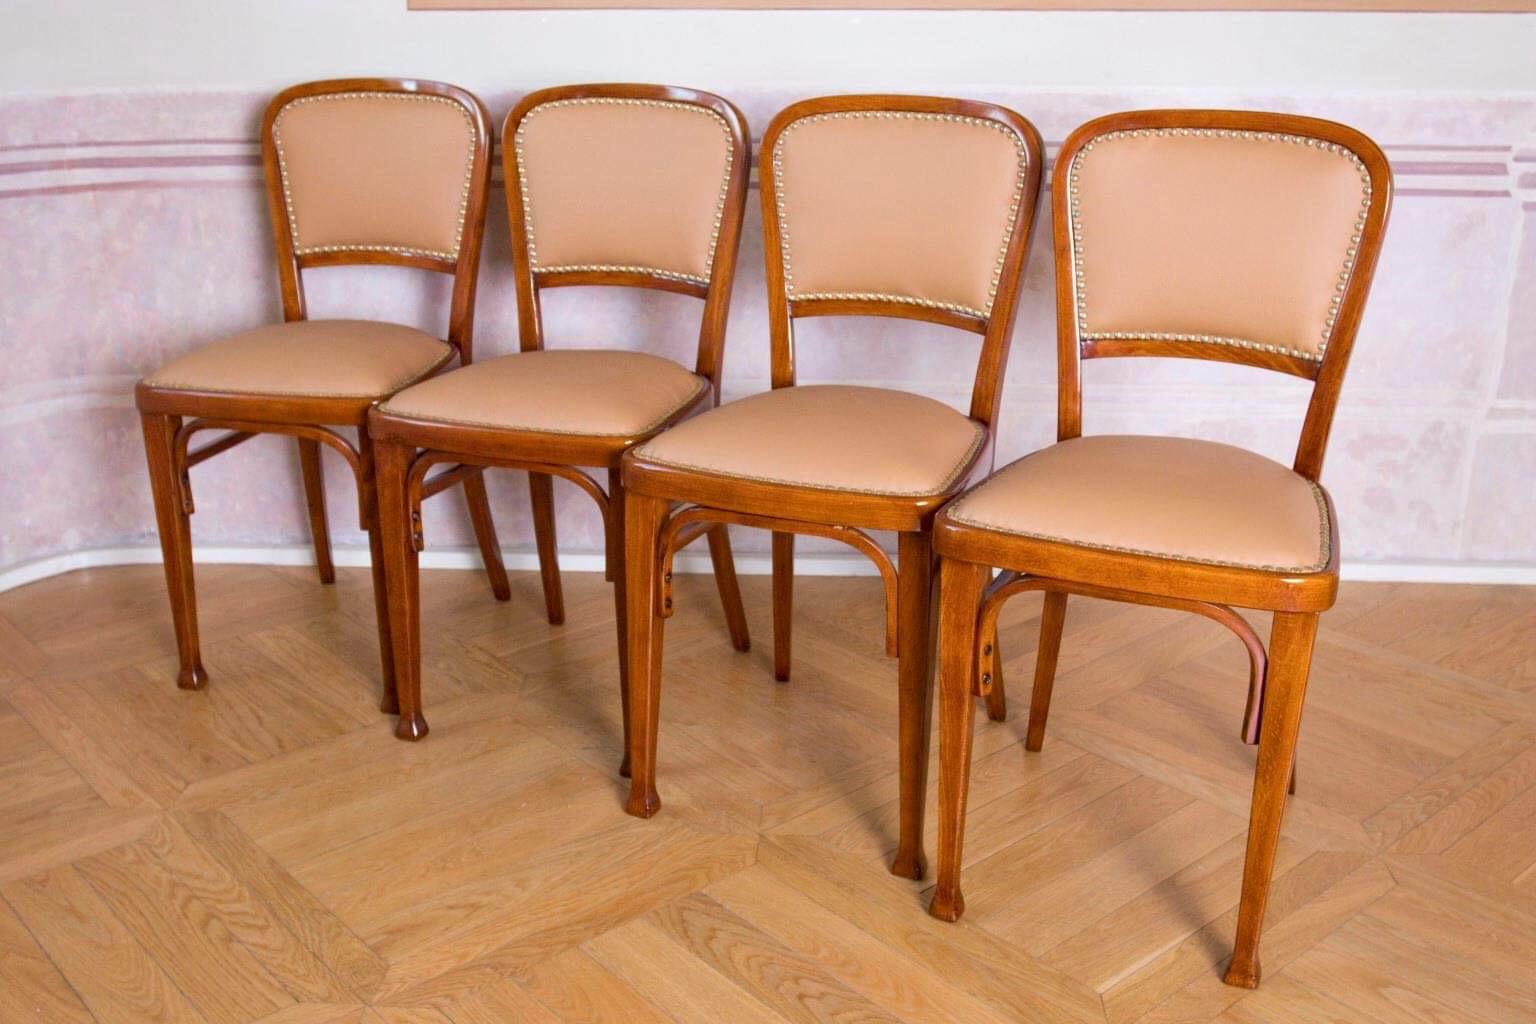 Wien Secession Thonet Coffee Set Attributed to Otto Wagner Designer For Sale 7